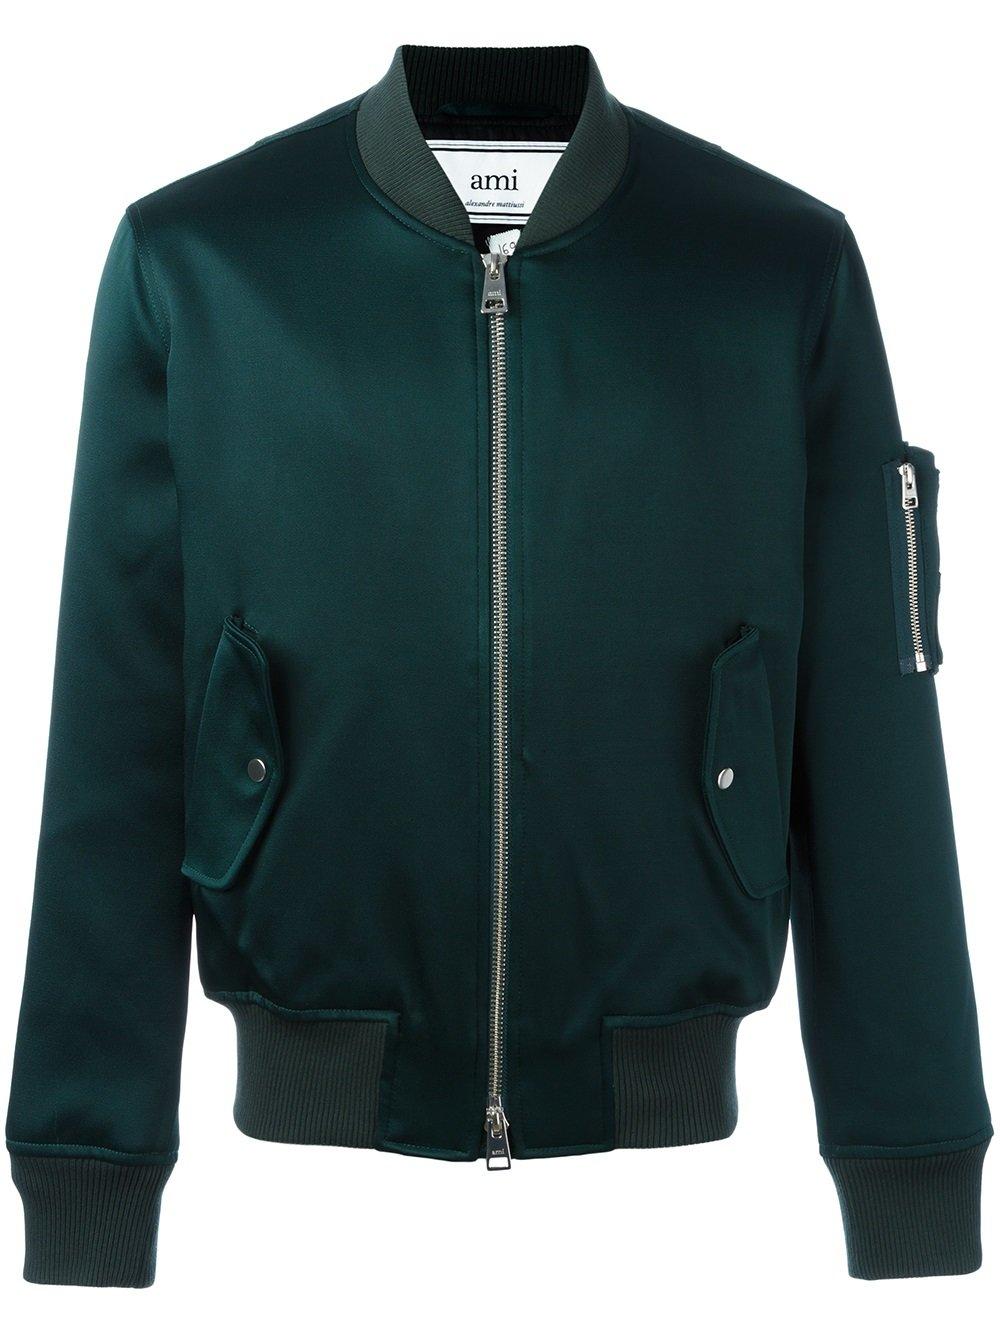 Ami Paris Zipped Bomber Jacket in Green for Men | Lyst